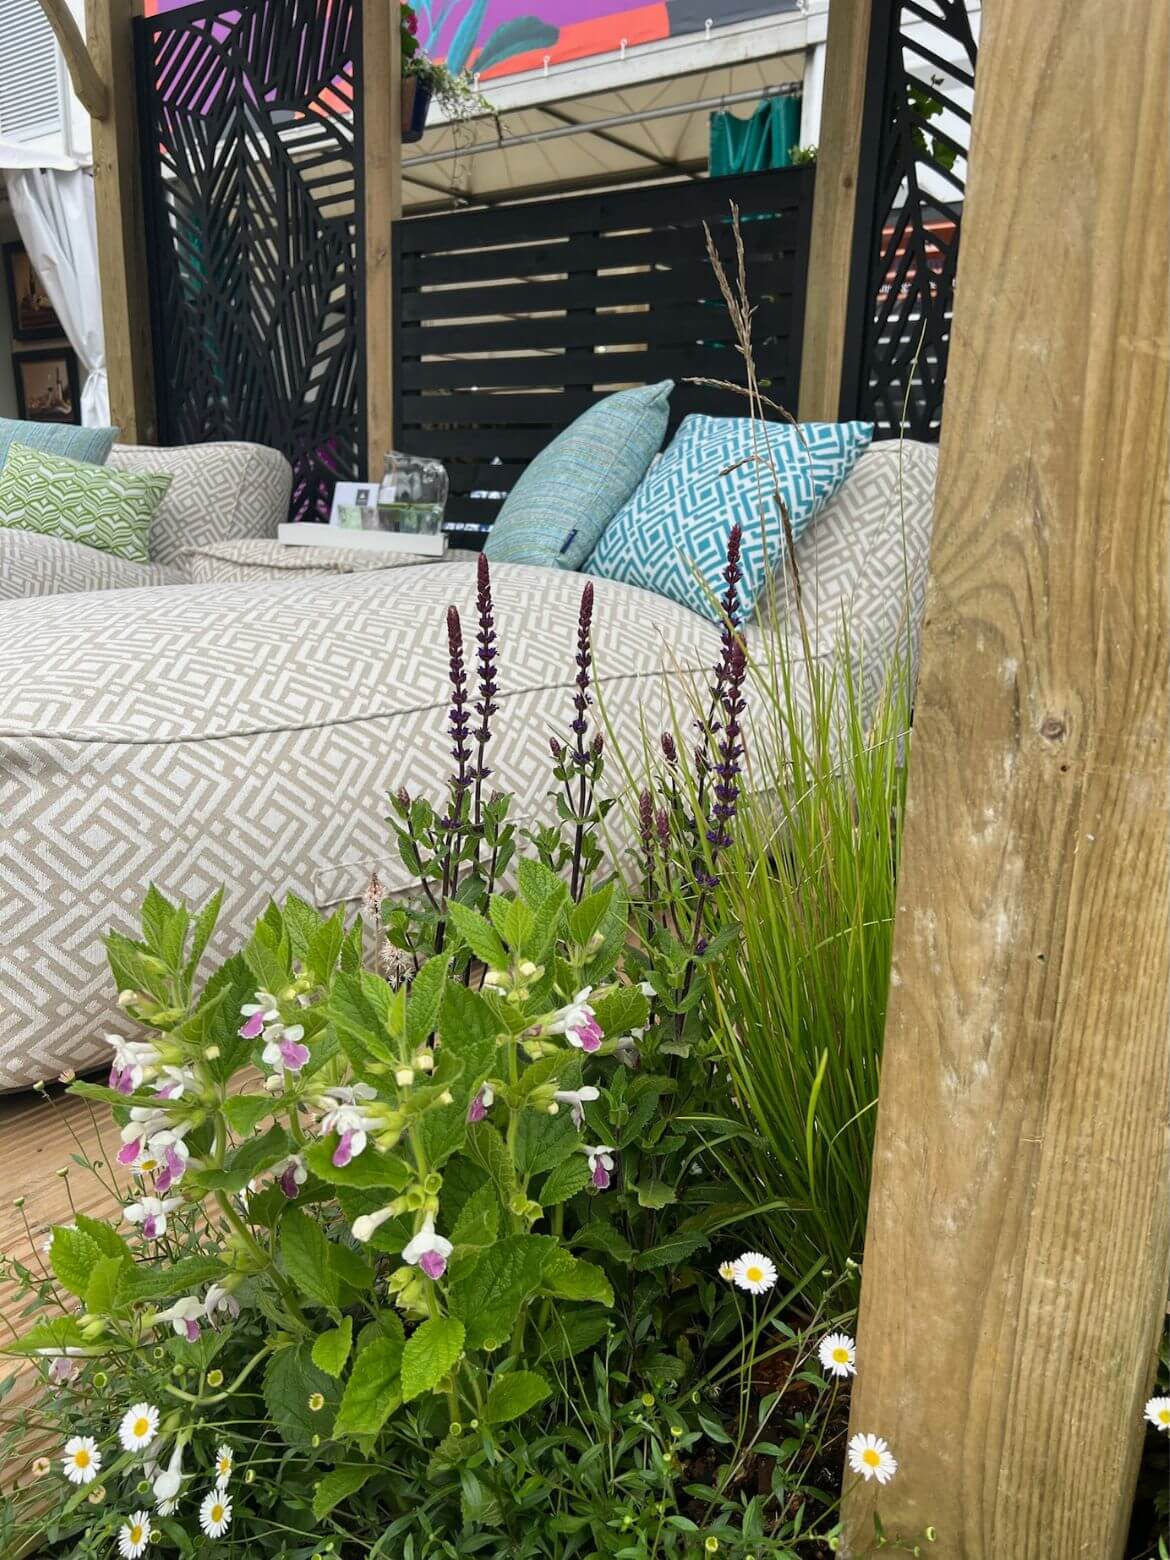 A luxury sun lounger surrounded by green foliage and purple salvias at the RHS Chelsea Flower Show